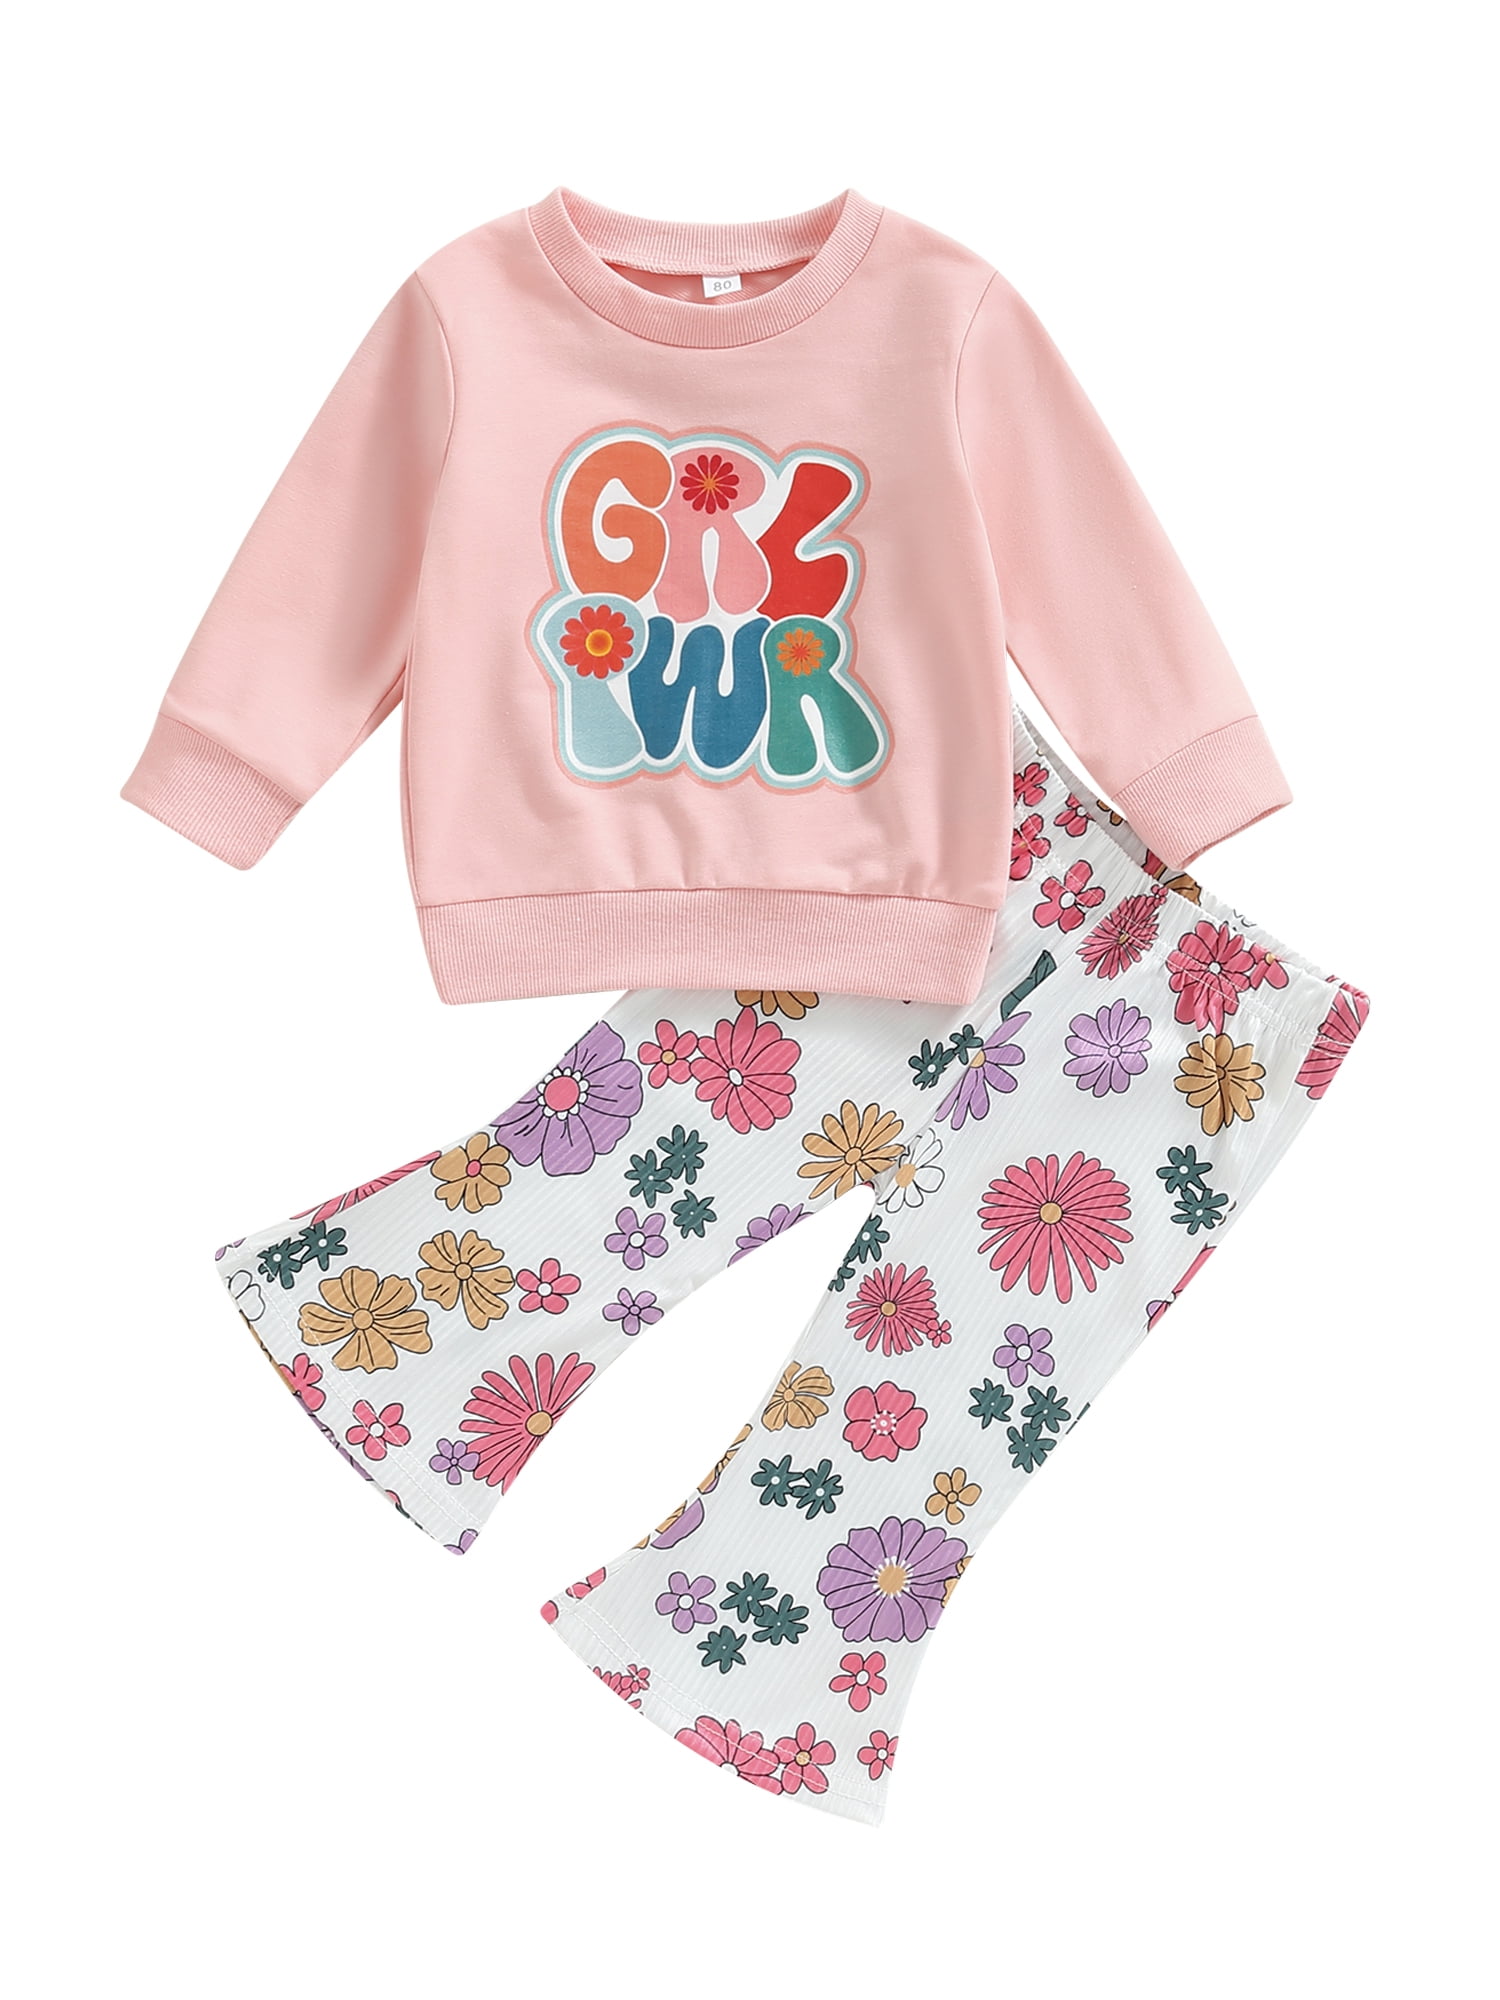 Calsunbaby Kids Baby Girls Floral Printed Outfits Set